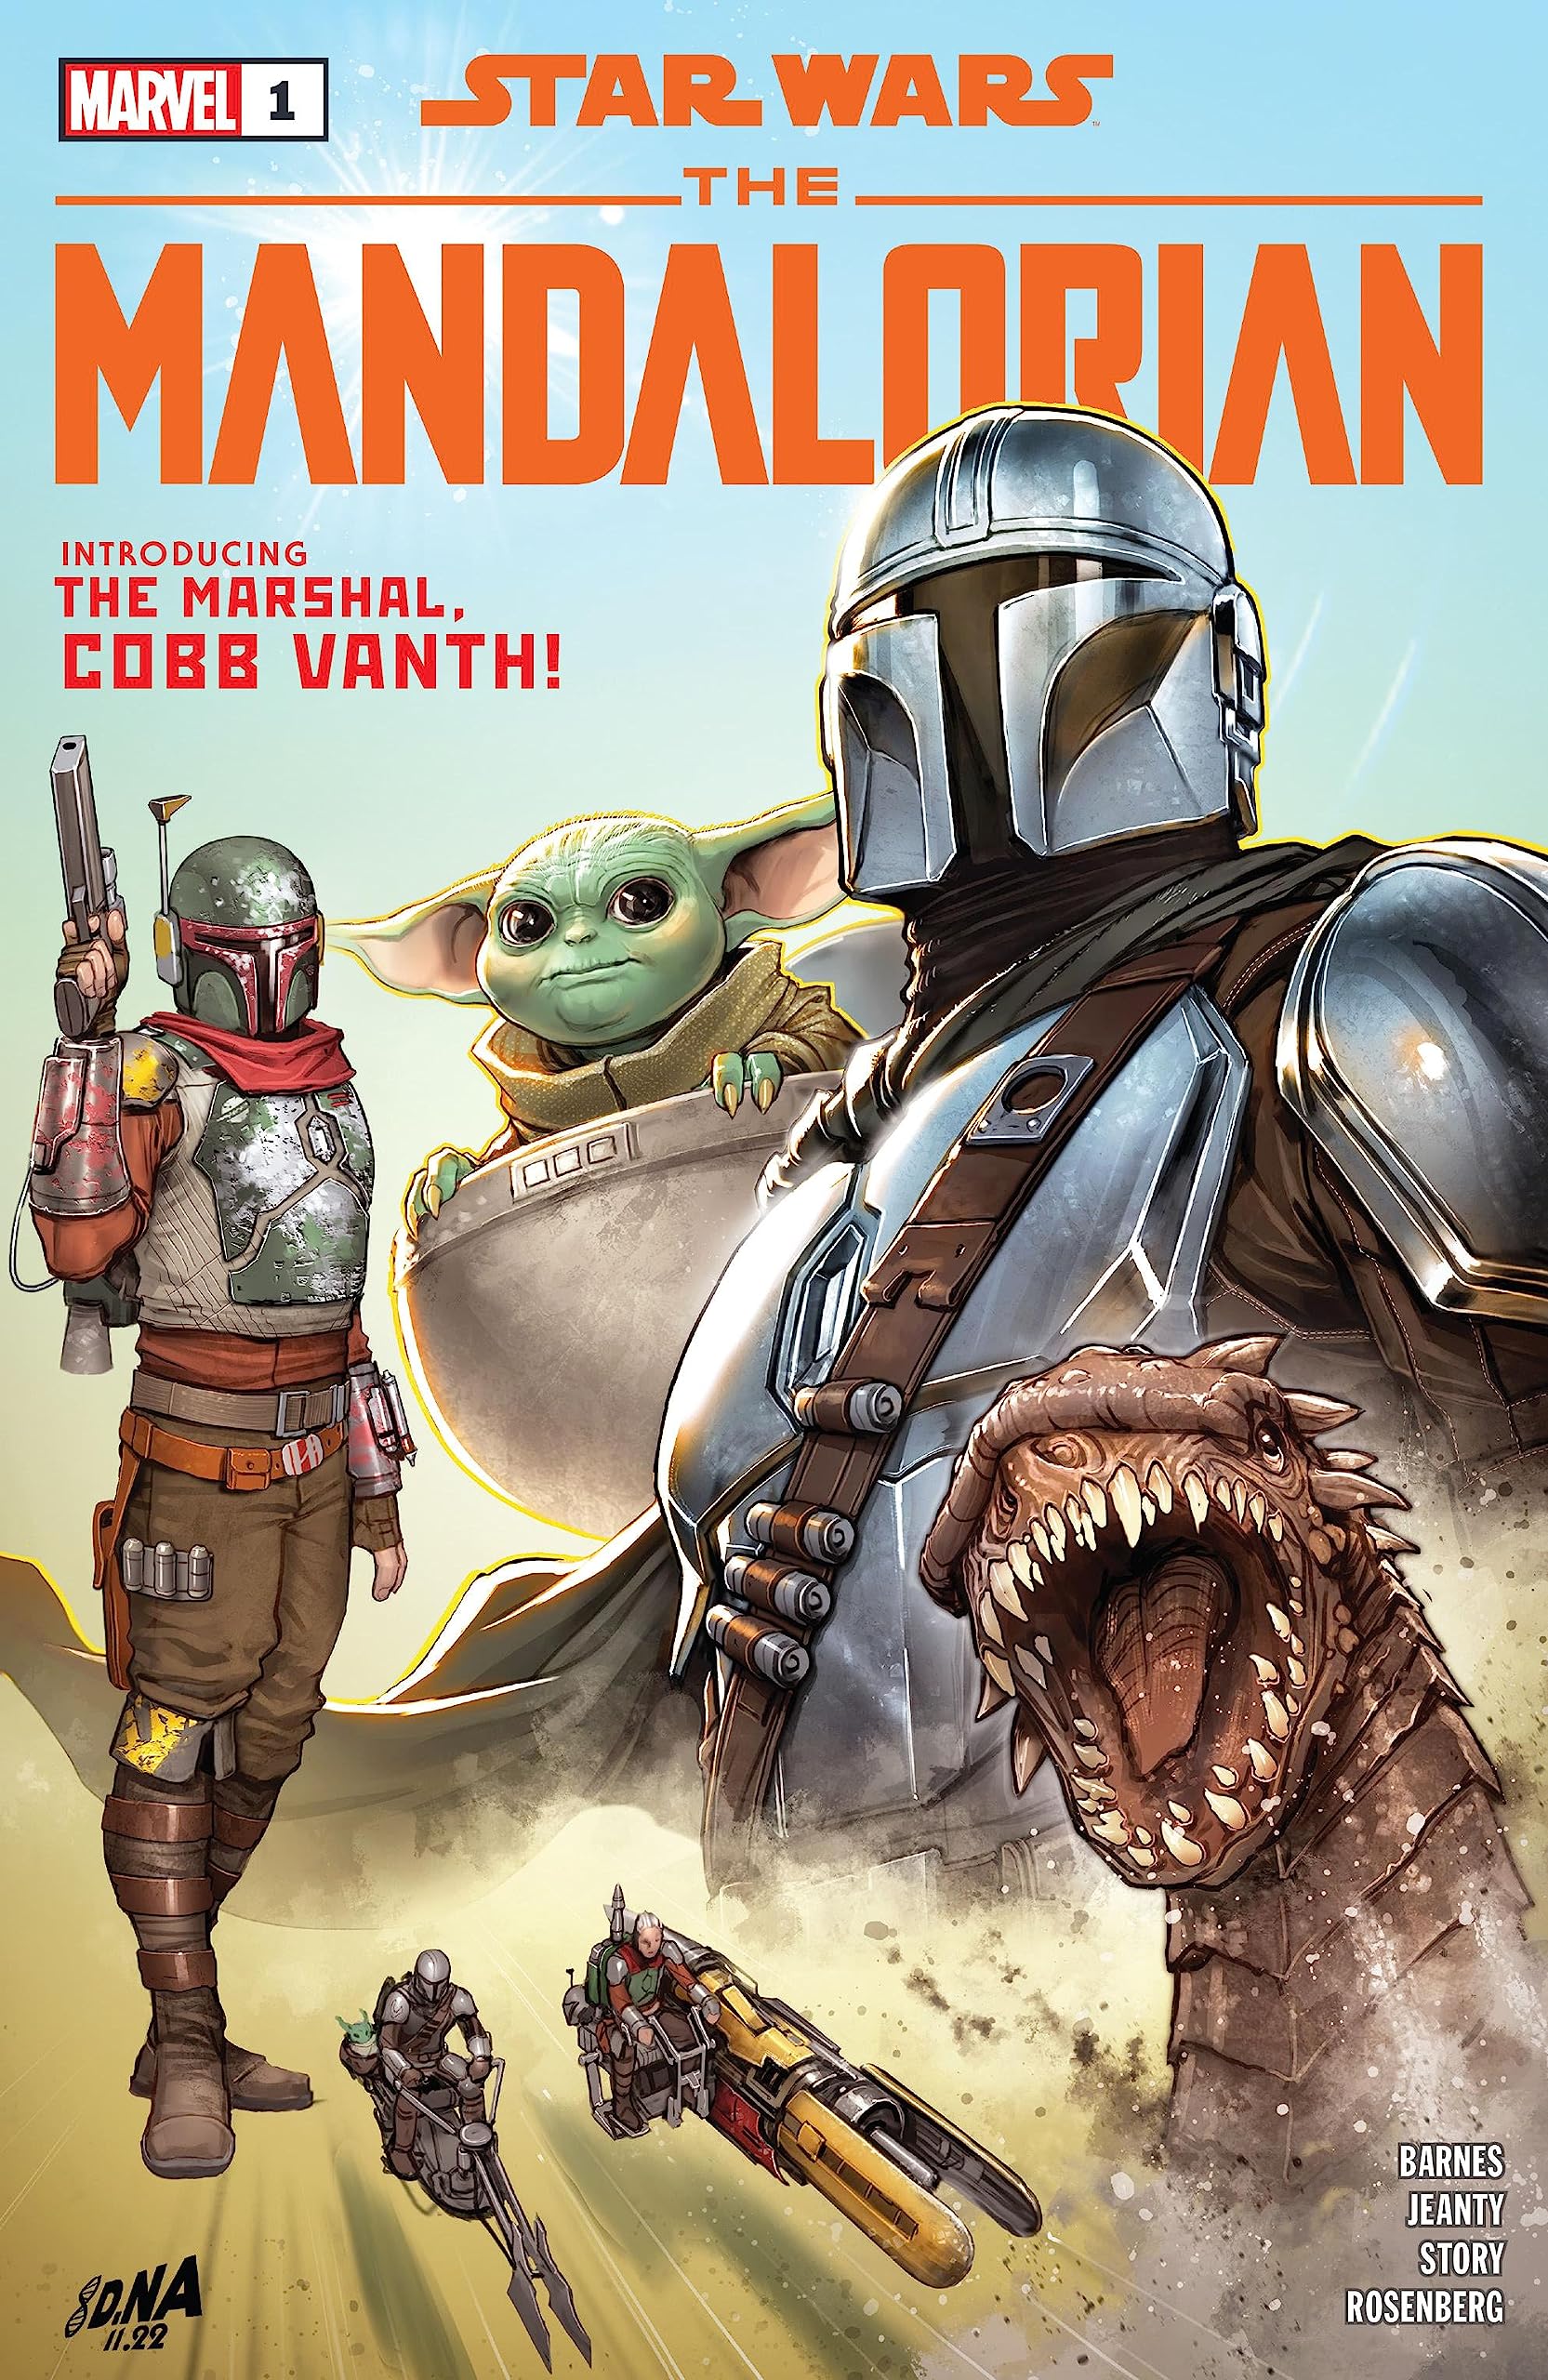 https://static.wikia.nocookie.net/starwars/images/f/fd/Marvel-Mandalorian-S2-1-Final-Cover.jpg/revision/latest?cb=20230610031129